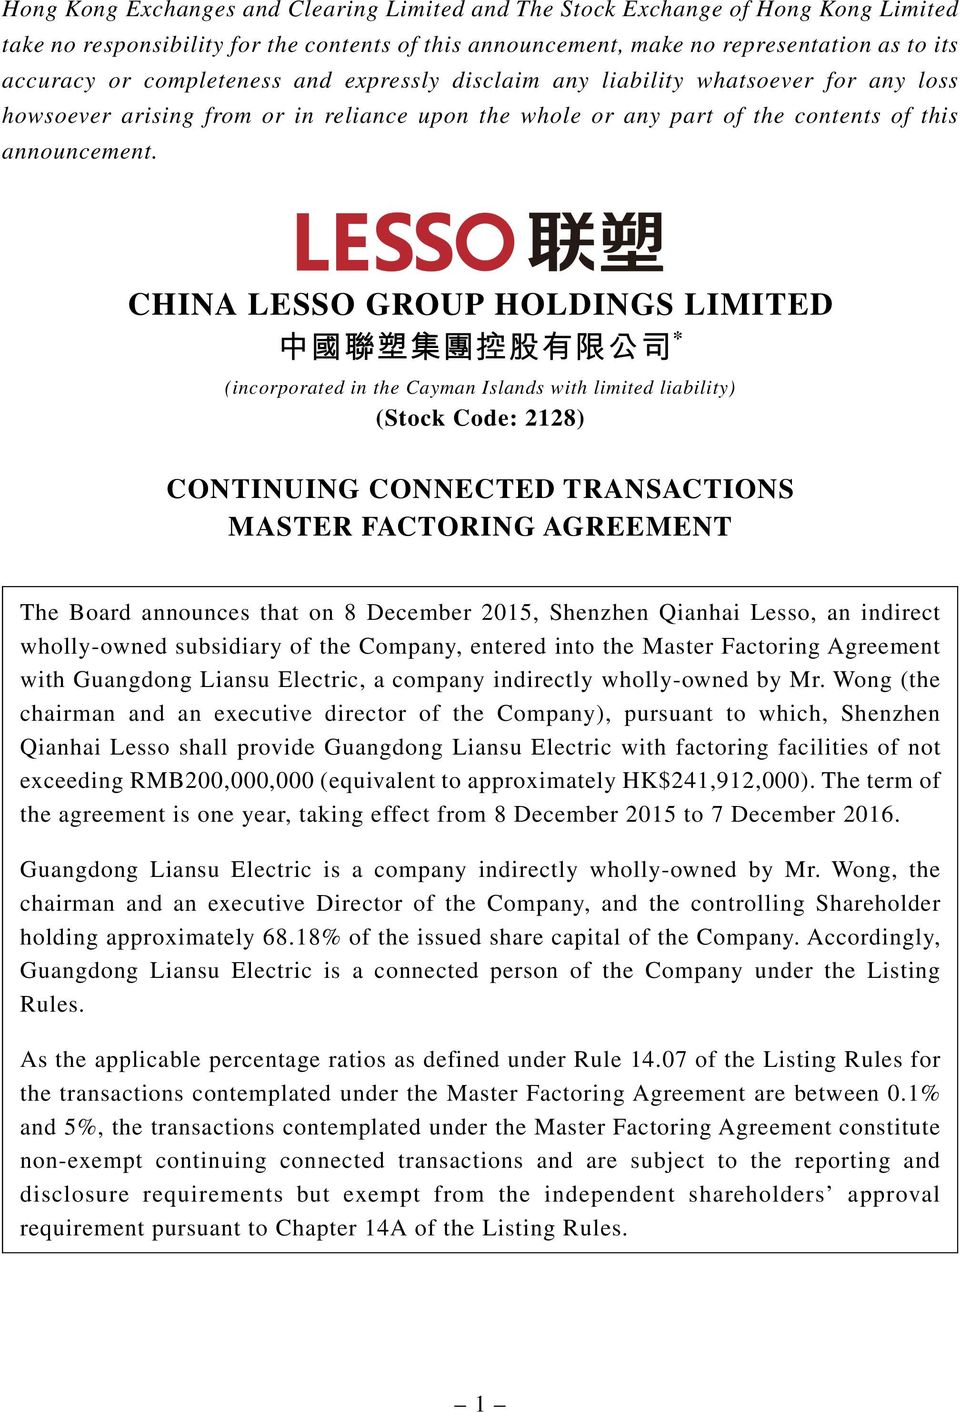 CHINA LESSO GROUP HOLDINGS LIMITED * (incorporated in the Cayman Islands with limited liability) (Stock Code: 2128) CONTINUING CONNECTED TRANSACTIONS MASTER FACTORING AGREEMENT The Board announces